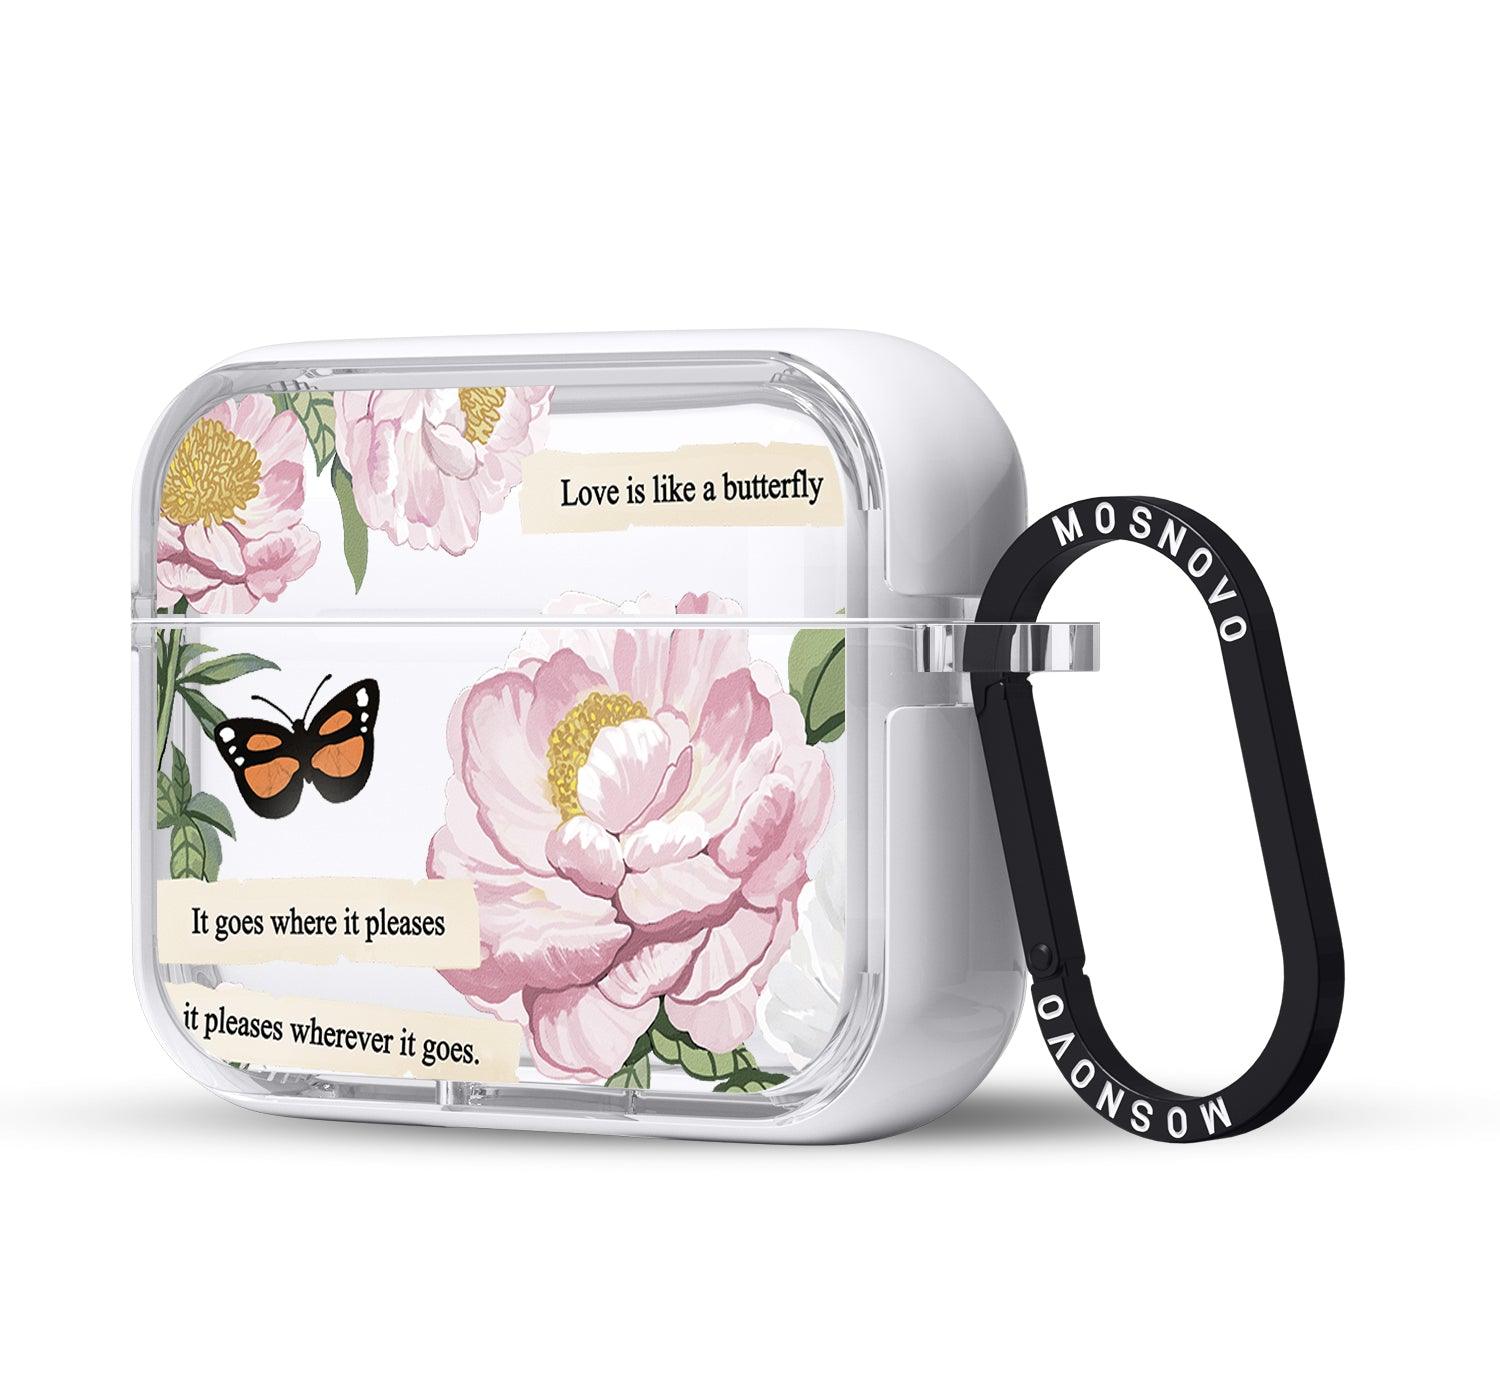 Bloom AirPods Pro 2 Case (2nd Generation) - MOSNOVO